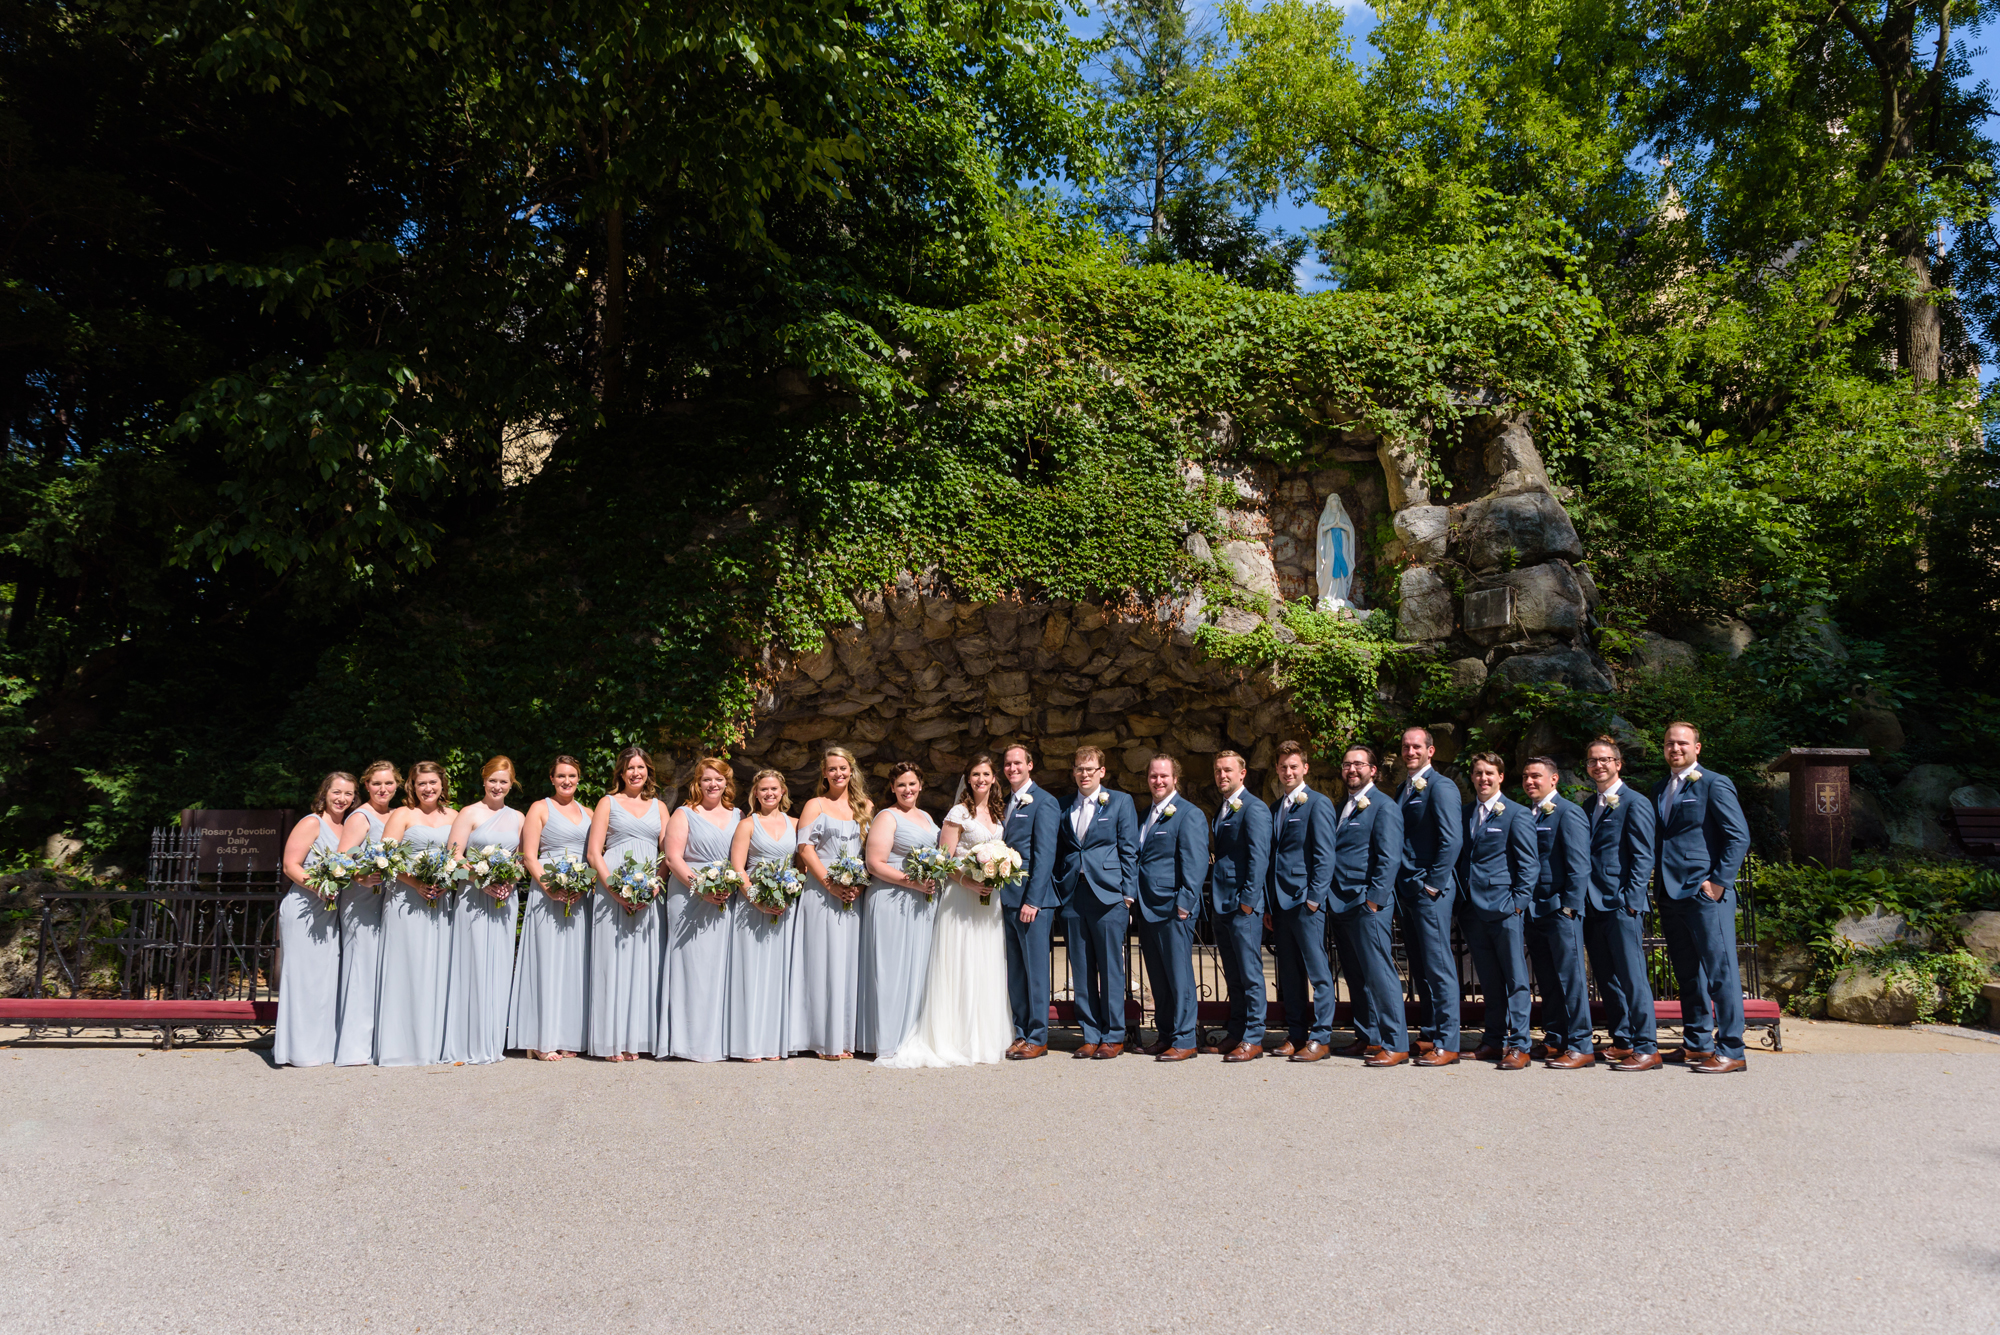 Bridal Party at the Grotto after a wedding ceremony at the Basilica of the Sacred Heart on the campus of the University of Notre Dame